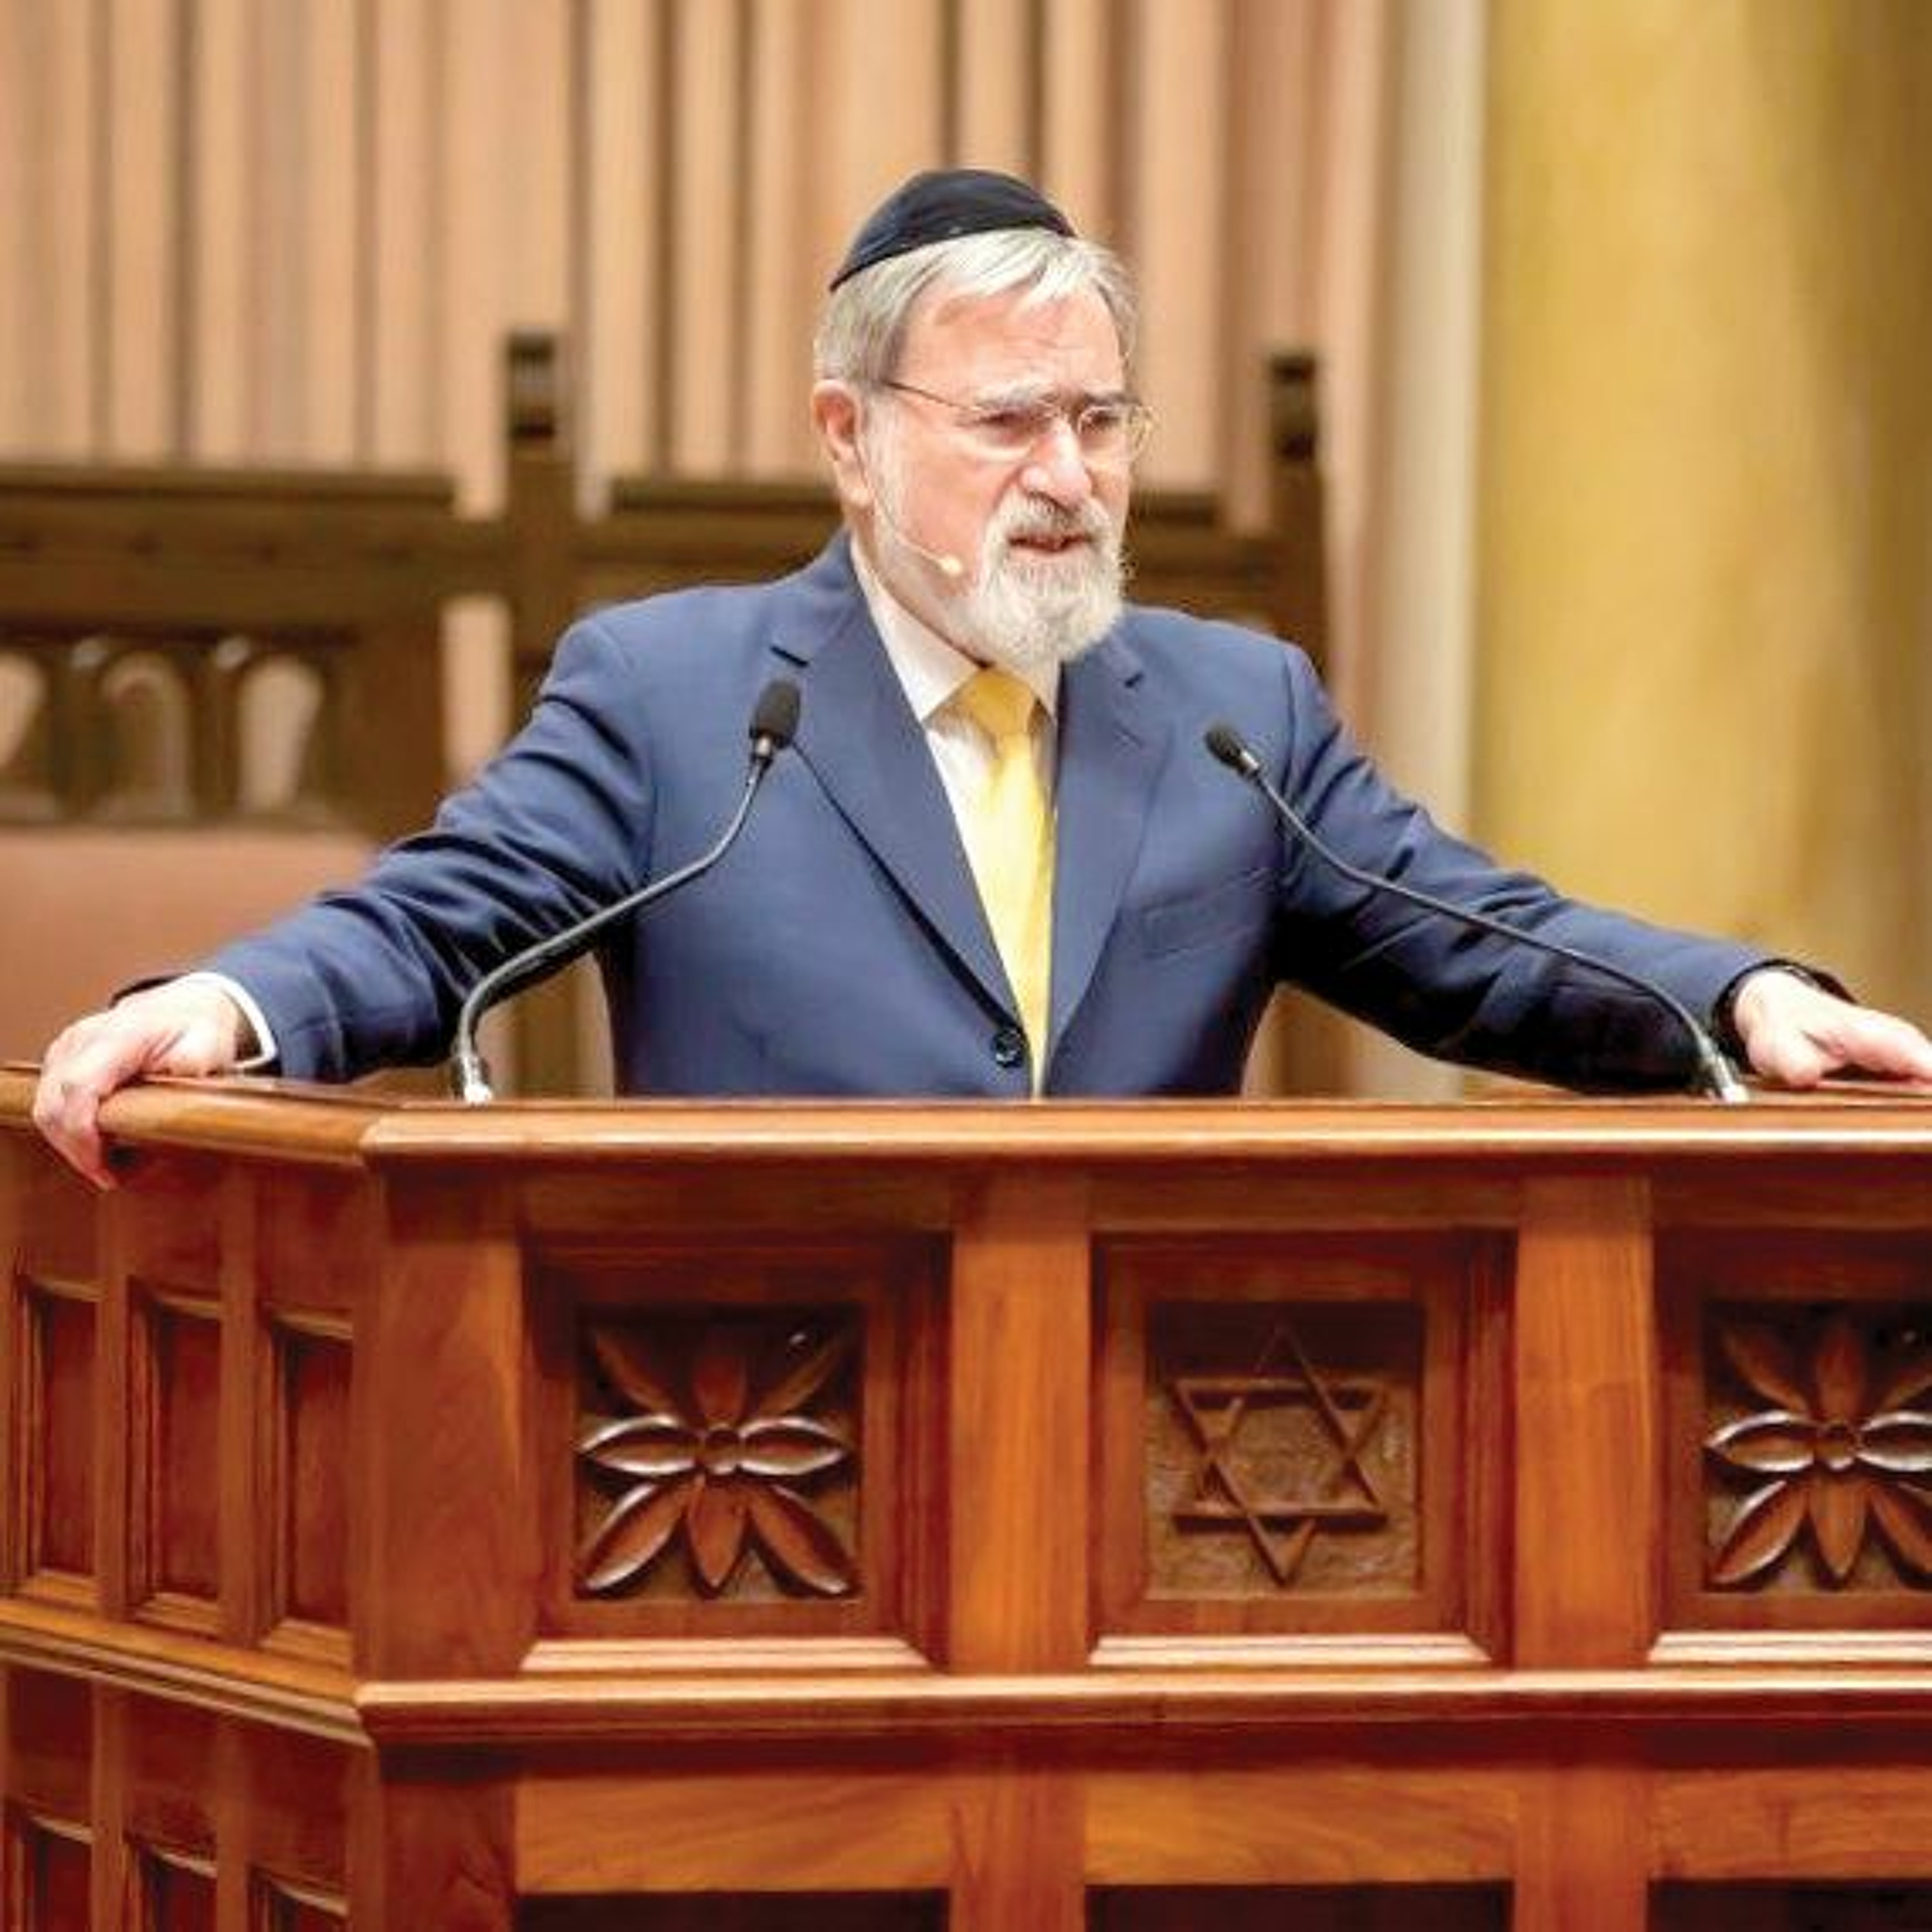 From the Archives: The Ellul Shiur from Rabbi Sacks in 2011